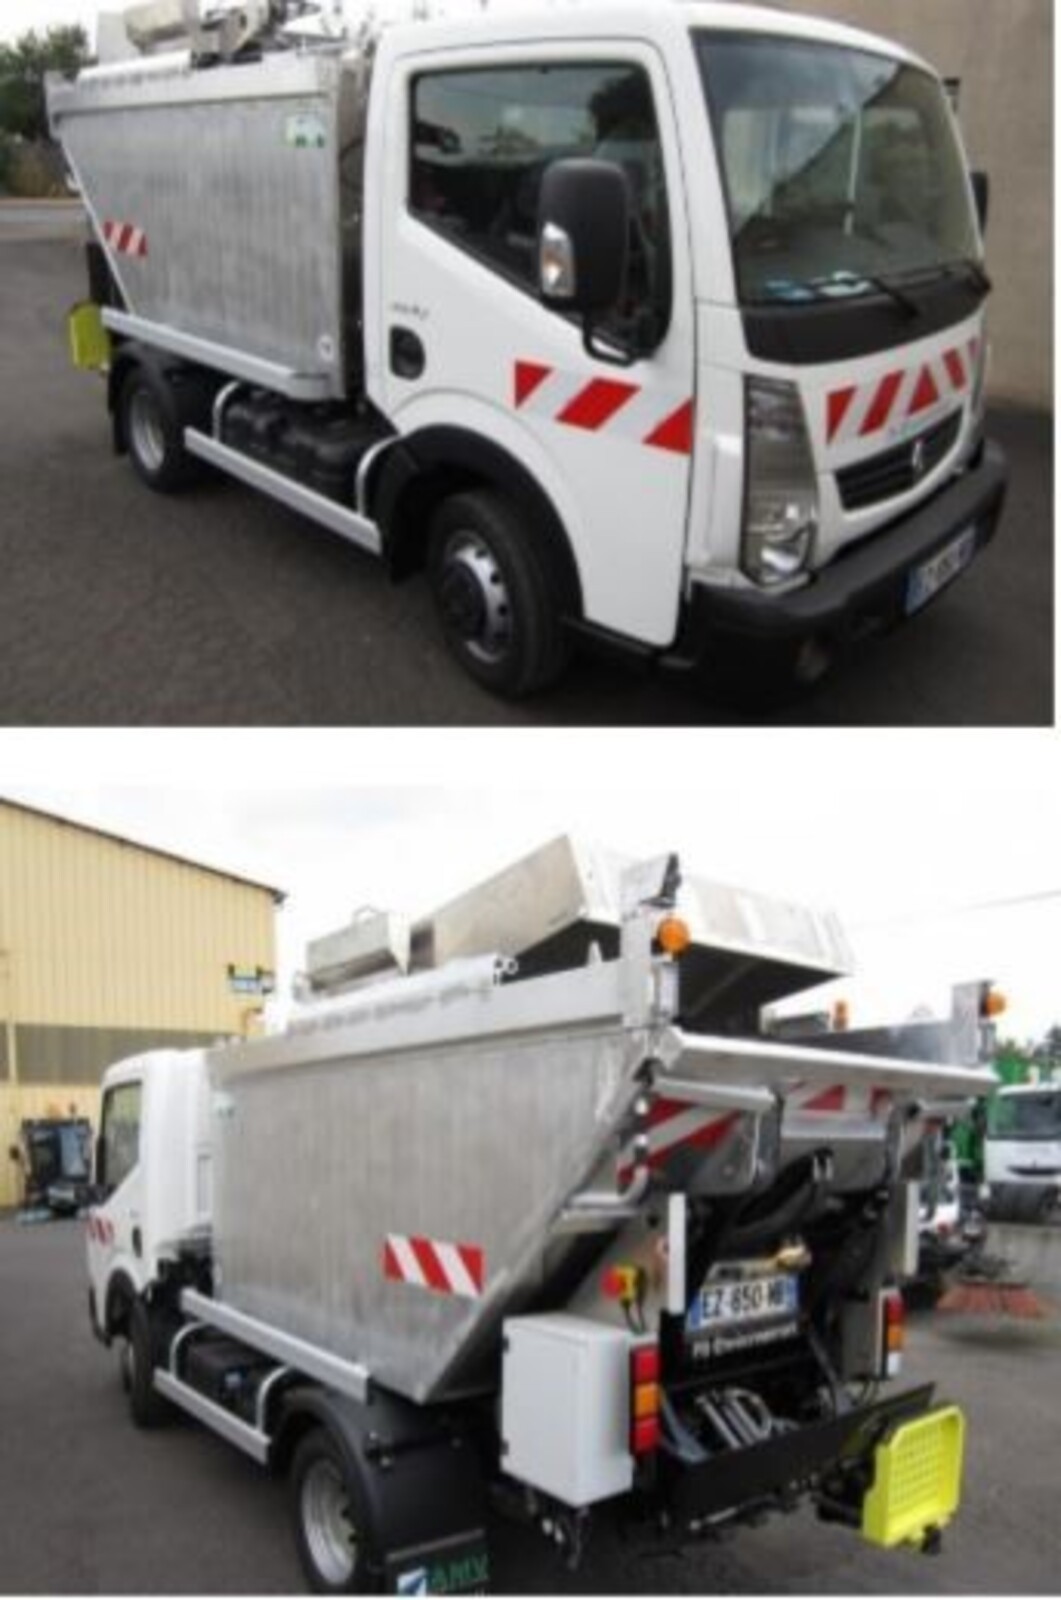 Reuse and recovery of waste collection equipment